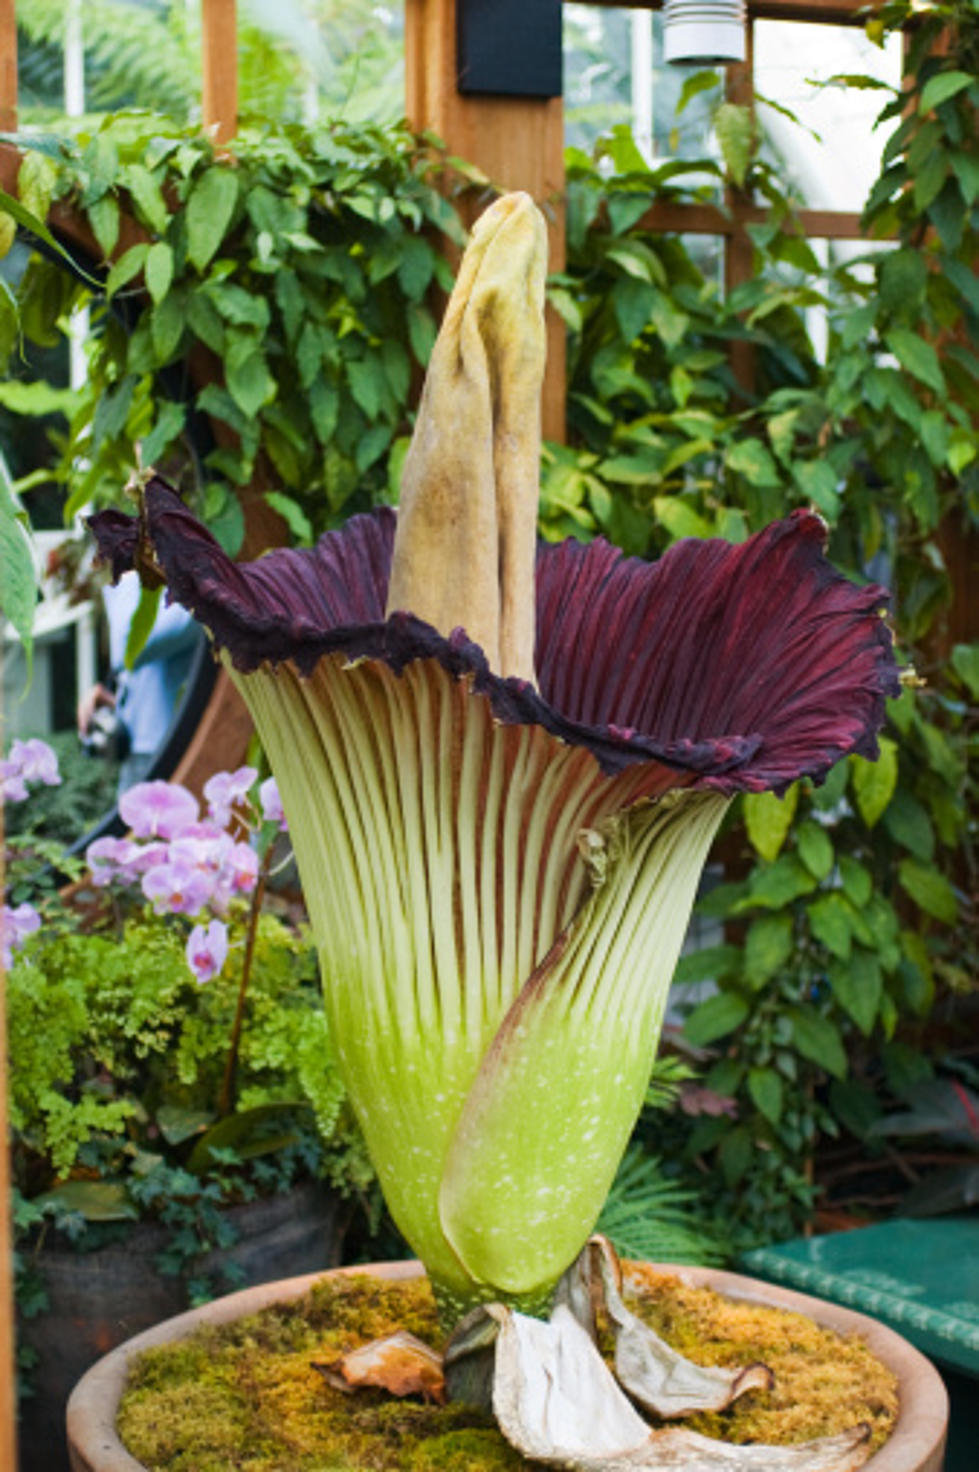 Rockford’s Stinky ‘Corpse Flower’ May Bloom Soon